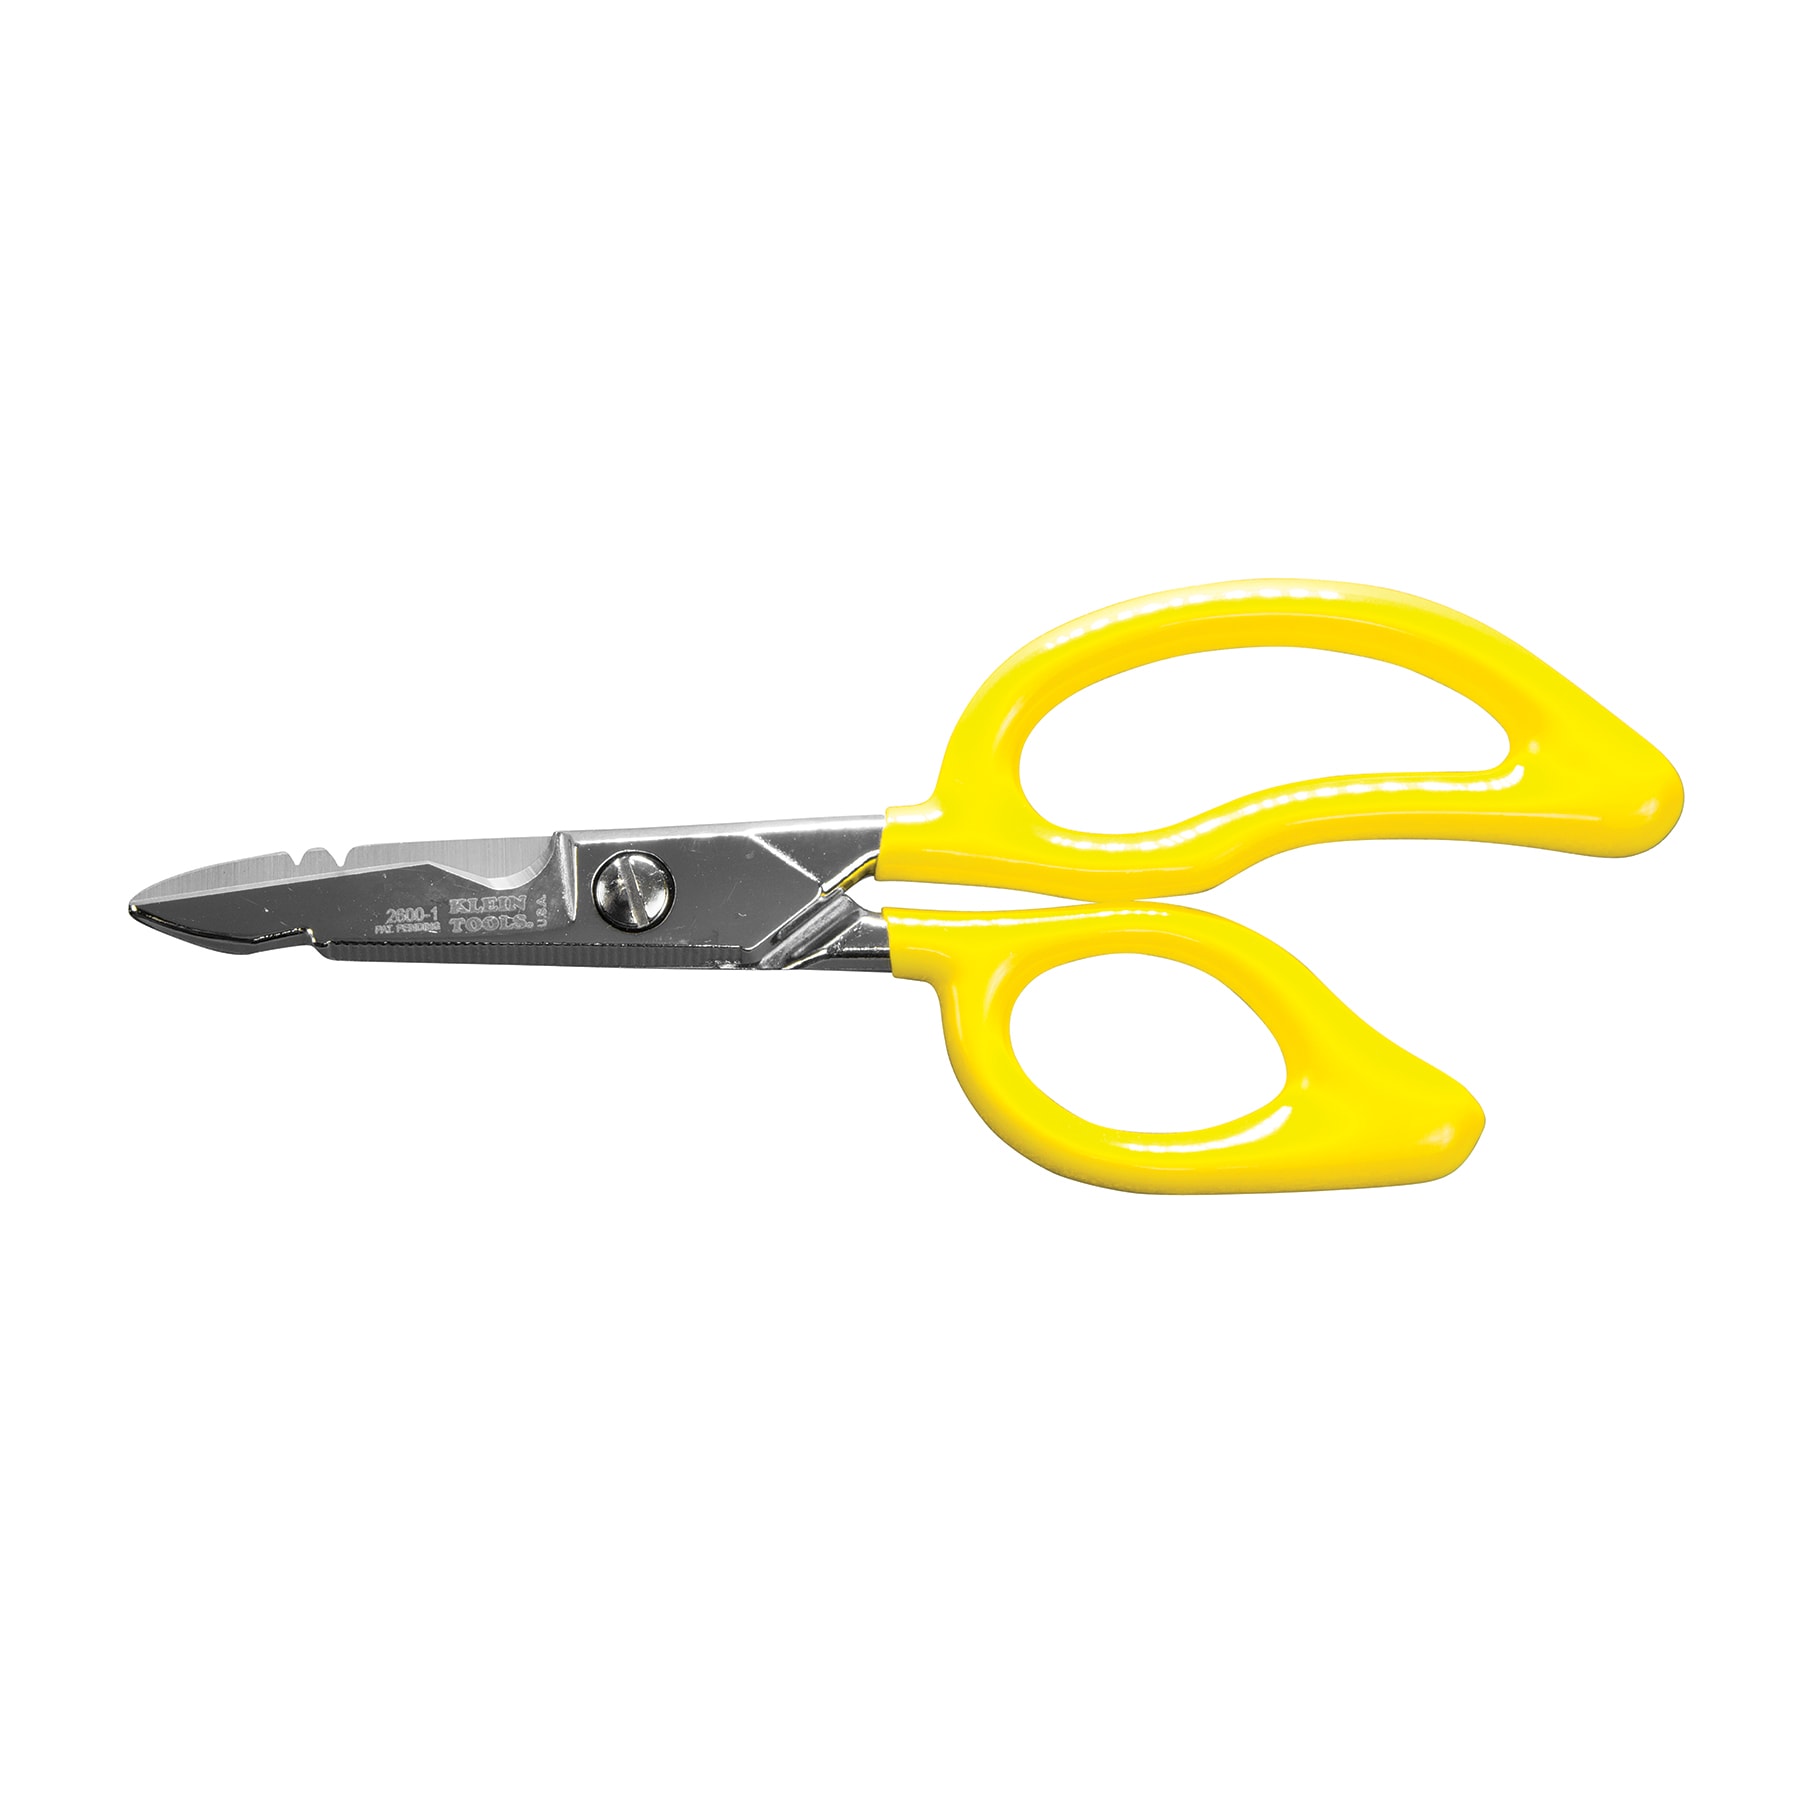 School Smart Blunt Tip Ambidextrous Plastic Covered Safety Scissors - Pack of 24 - Yellow